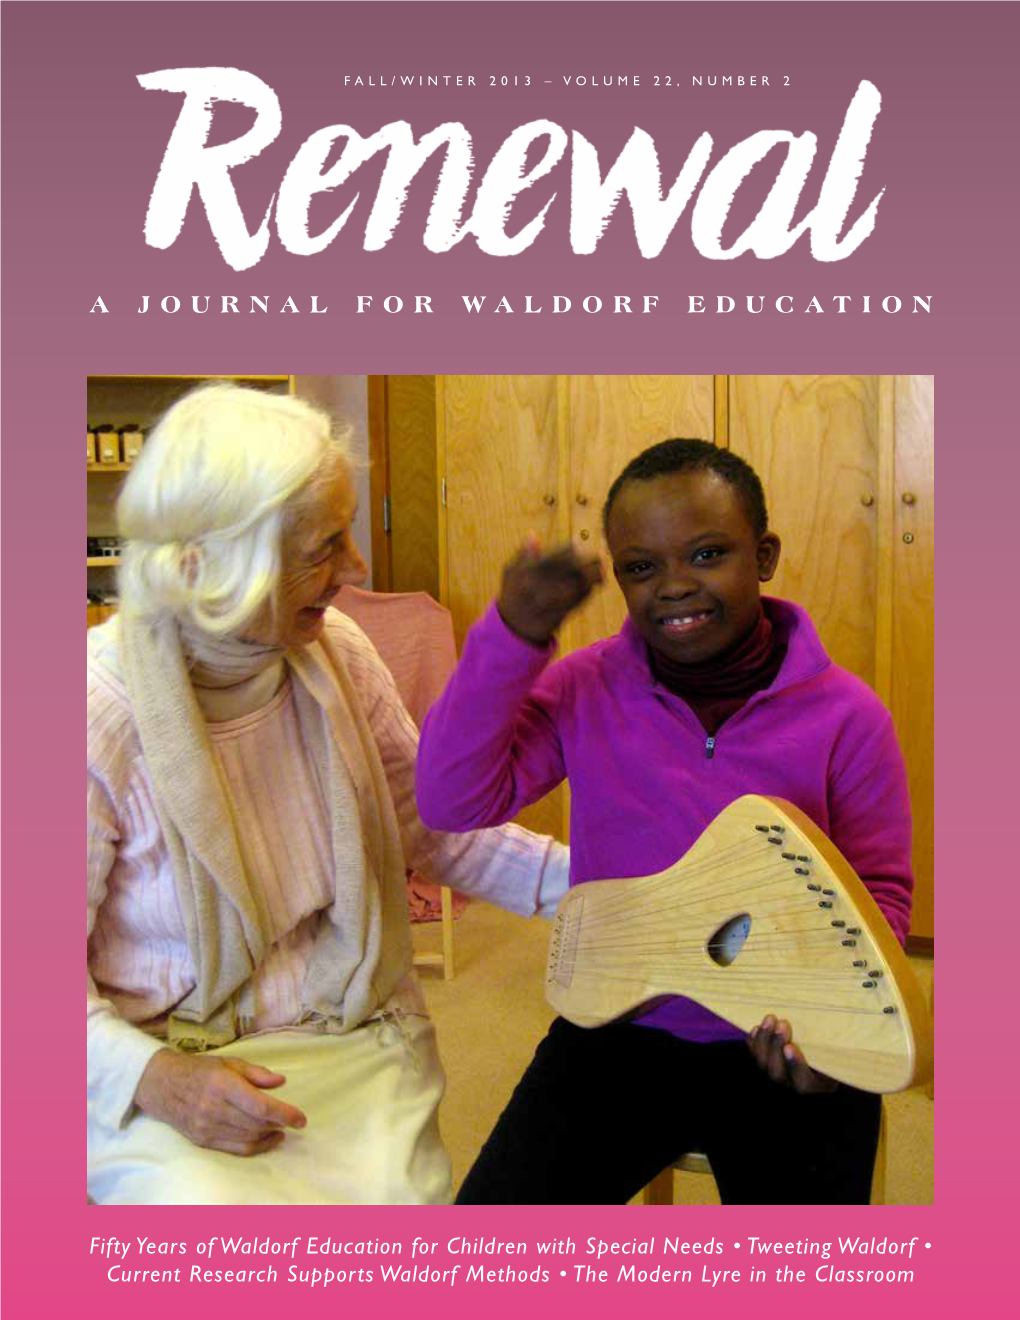 A JOURNAL for WALDORF EDUCATION • Waldorf School on the Roaring Fork Connecticut: Housatonic Valley Waldorf School Florida: Waldorf Sarasota •